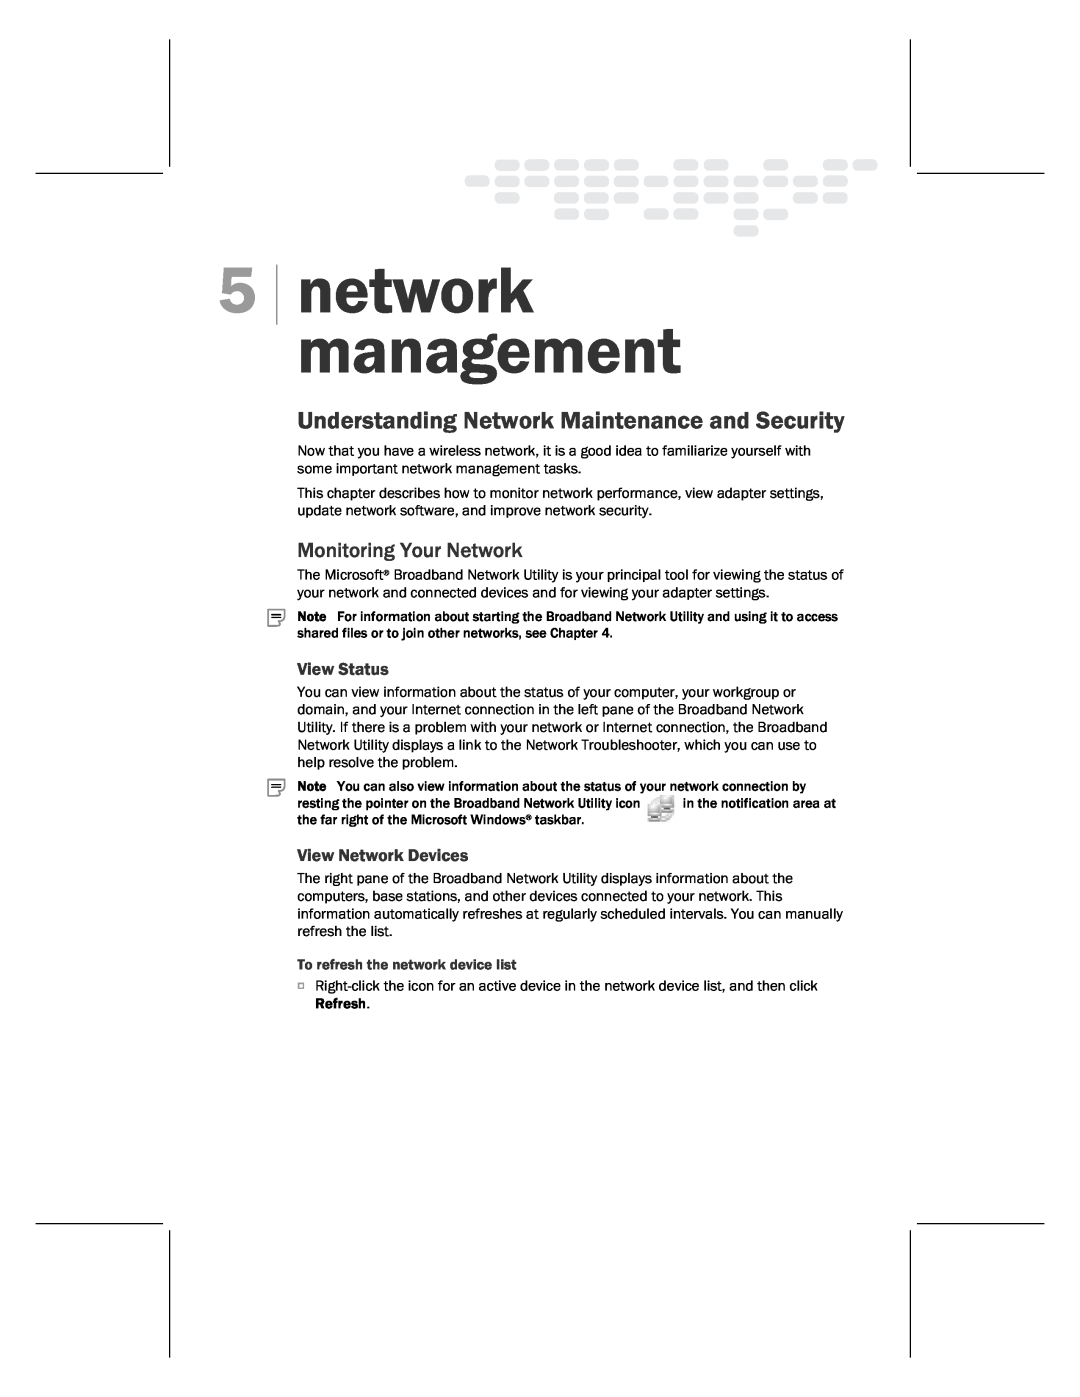 Microsoft MN-820 Understanding Network Maintenance and Security, Monitoring Your Network, View Status, network management 